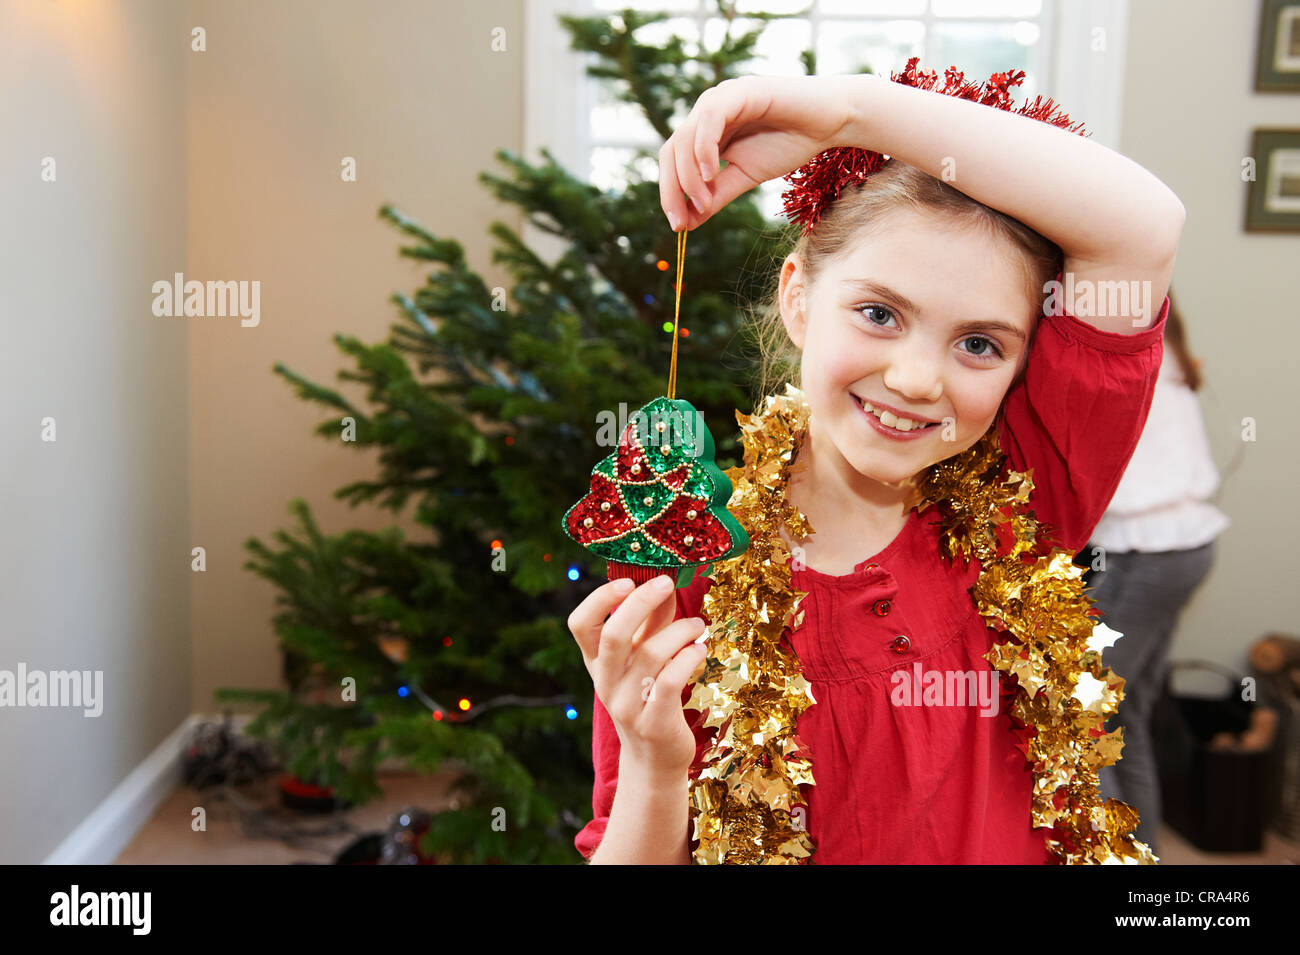 Girl playing with Christmas decorations Stock Photo